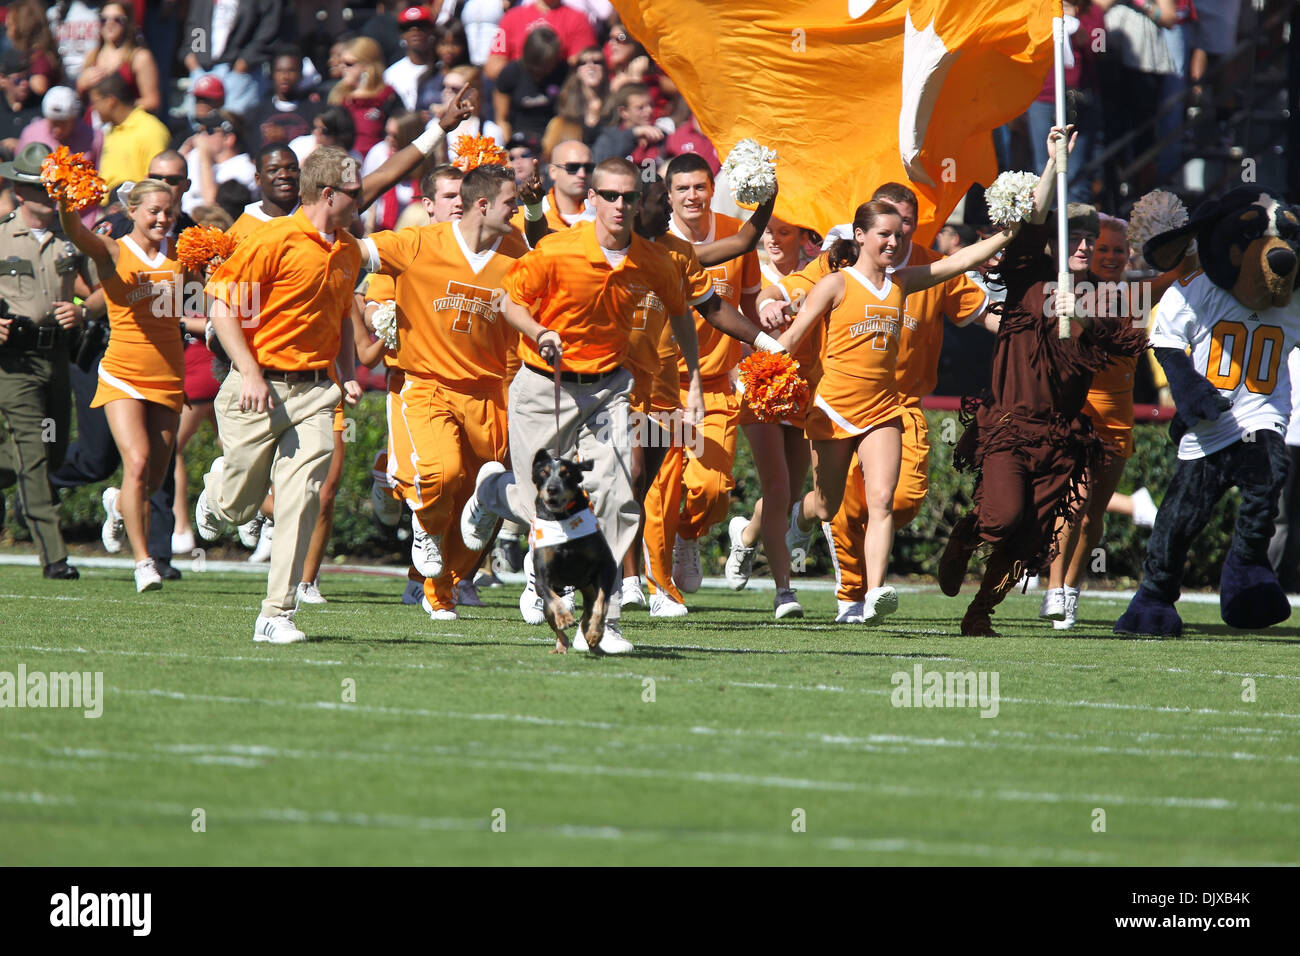 Oct. 30, 2010 - Columbia, South Carolina, United States of America - The Volunteer Cheerleaders of Tennessee and Smokey lead their team onto the field against the Gamecocks. FInal score is South Carolina 38-Tennessee 24. (Credit Image: © Jim Dedmon/Southcreek Global/ZUMApress.com) Stock Photo